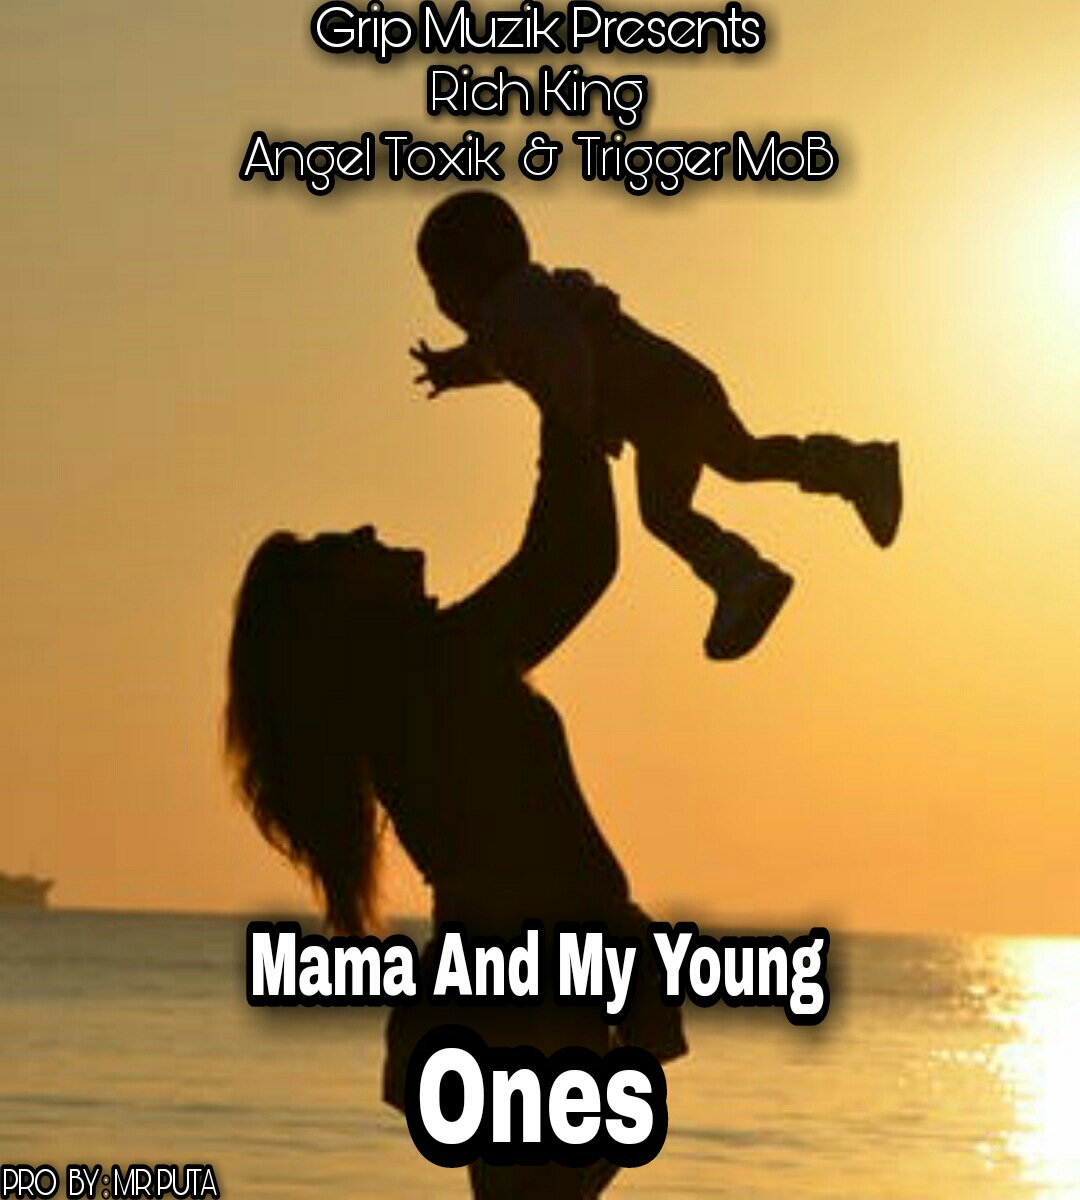 Rich King Ft Trigga Mob & Angel Toxik - Mama & My Young Ones